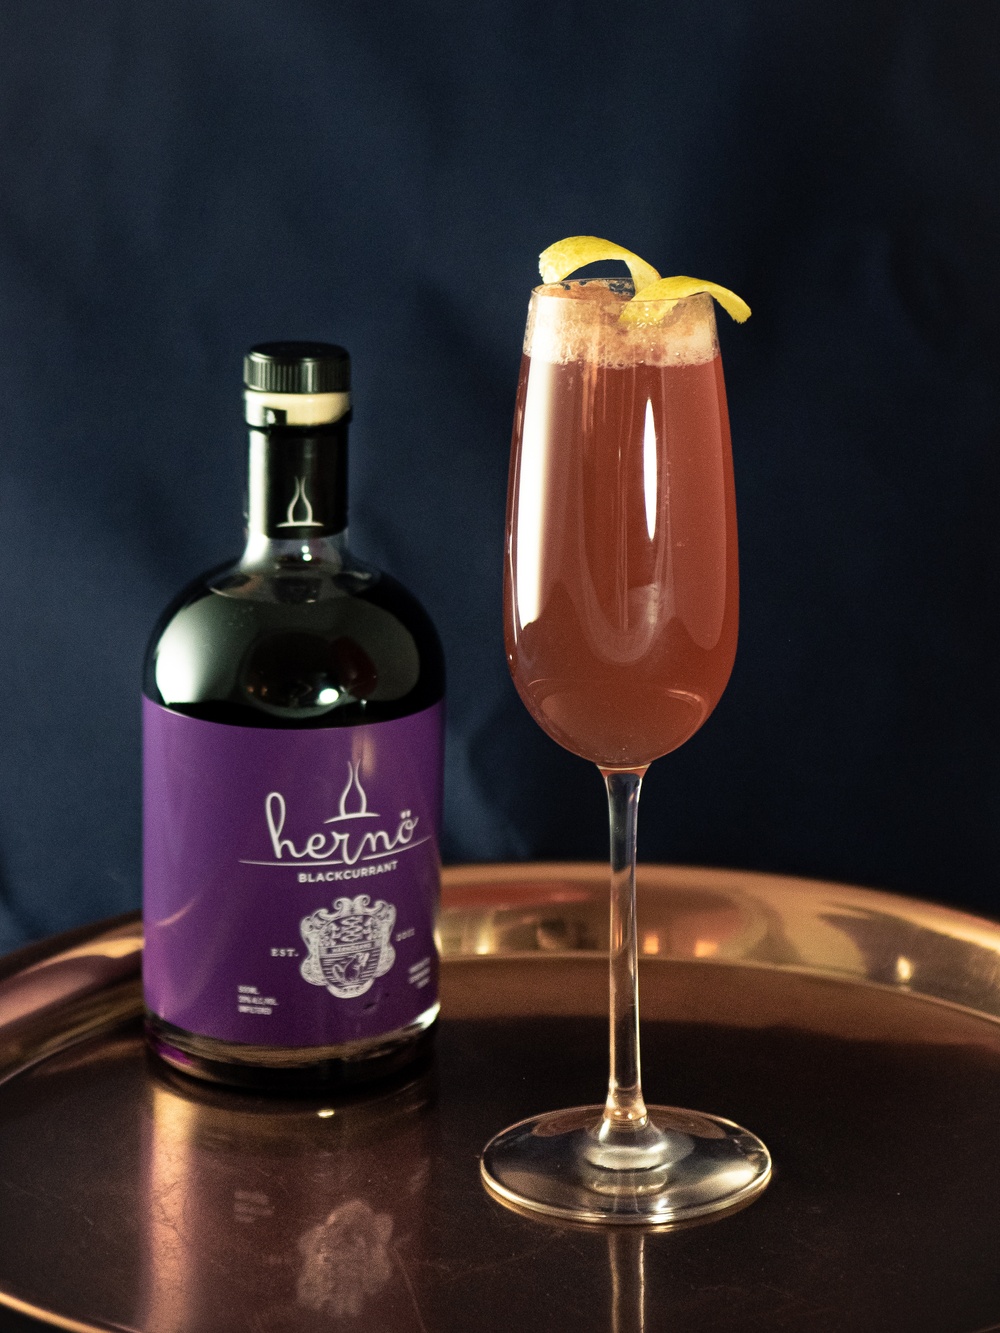 Our twist on the classic French 75, with Hernö Blackcurrant. Cassis Noir. Fruity and fresh. If you haven’t tried it already, we highly recommend the classic too.

Ingredients
50 ml Hernö Blackcurrant
15 ml lemon juice
15 ml simple syrup
Champagne

Preparation
Pour Hernö Blackcurrant, fresh lemon juice and simple syrup into a shaker. Fill the shaker with ice and shake for about 10 seconds. Strain the cocktail into a champagne flute and top with Champagne.